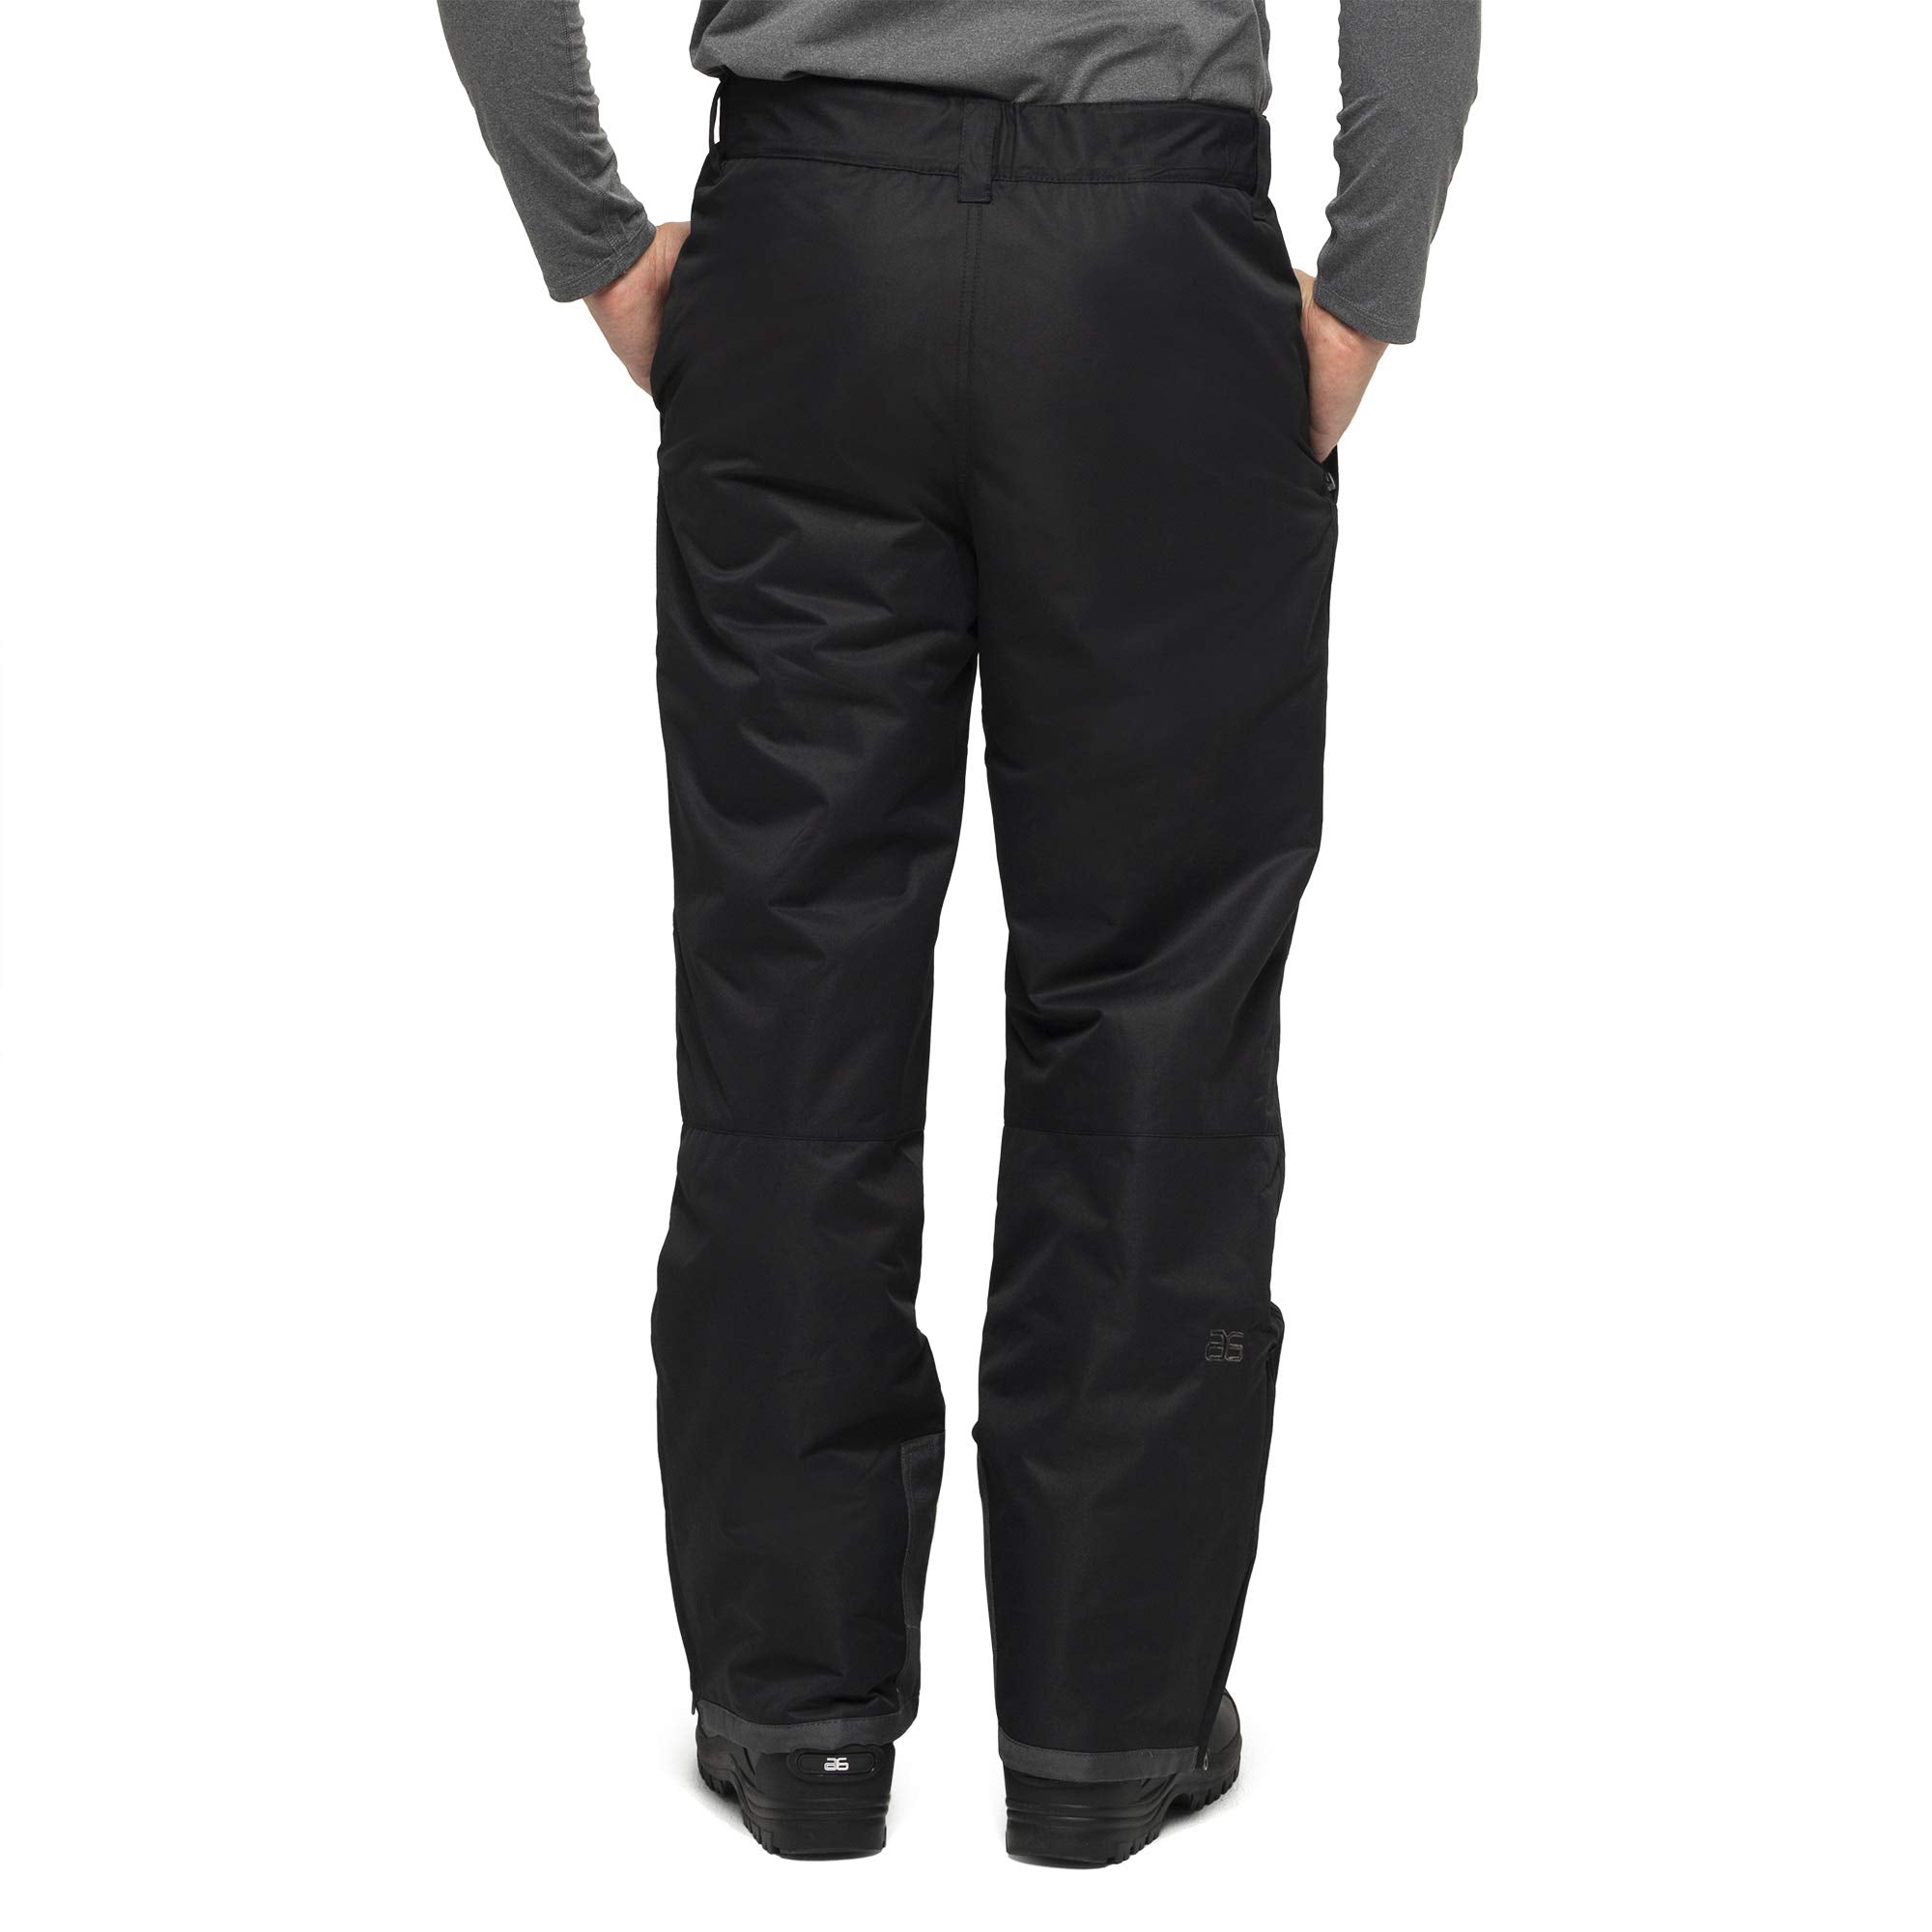 Arctix Men's Essential Snow Pants in Black XX-Large - BRAND NEW WITH TAGS 